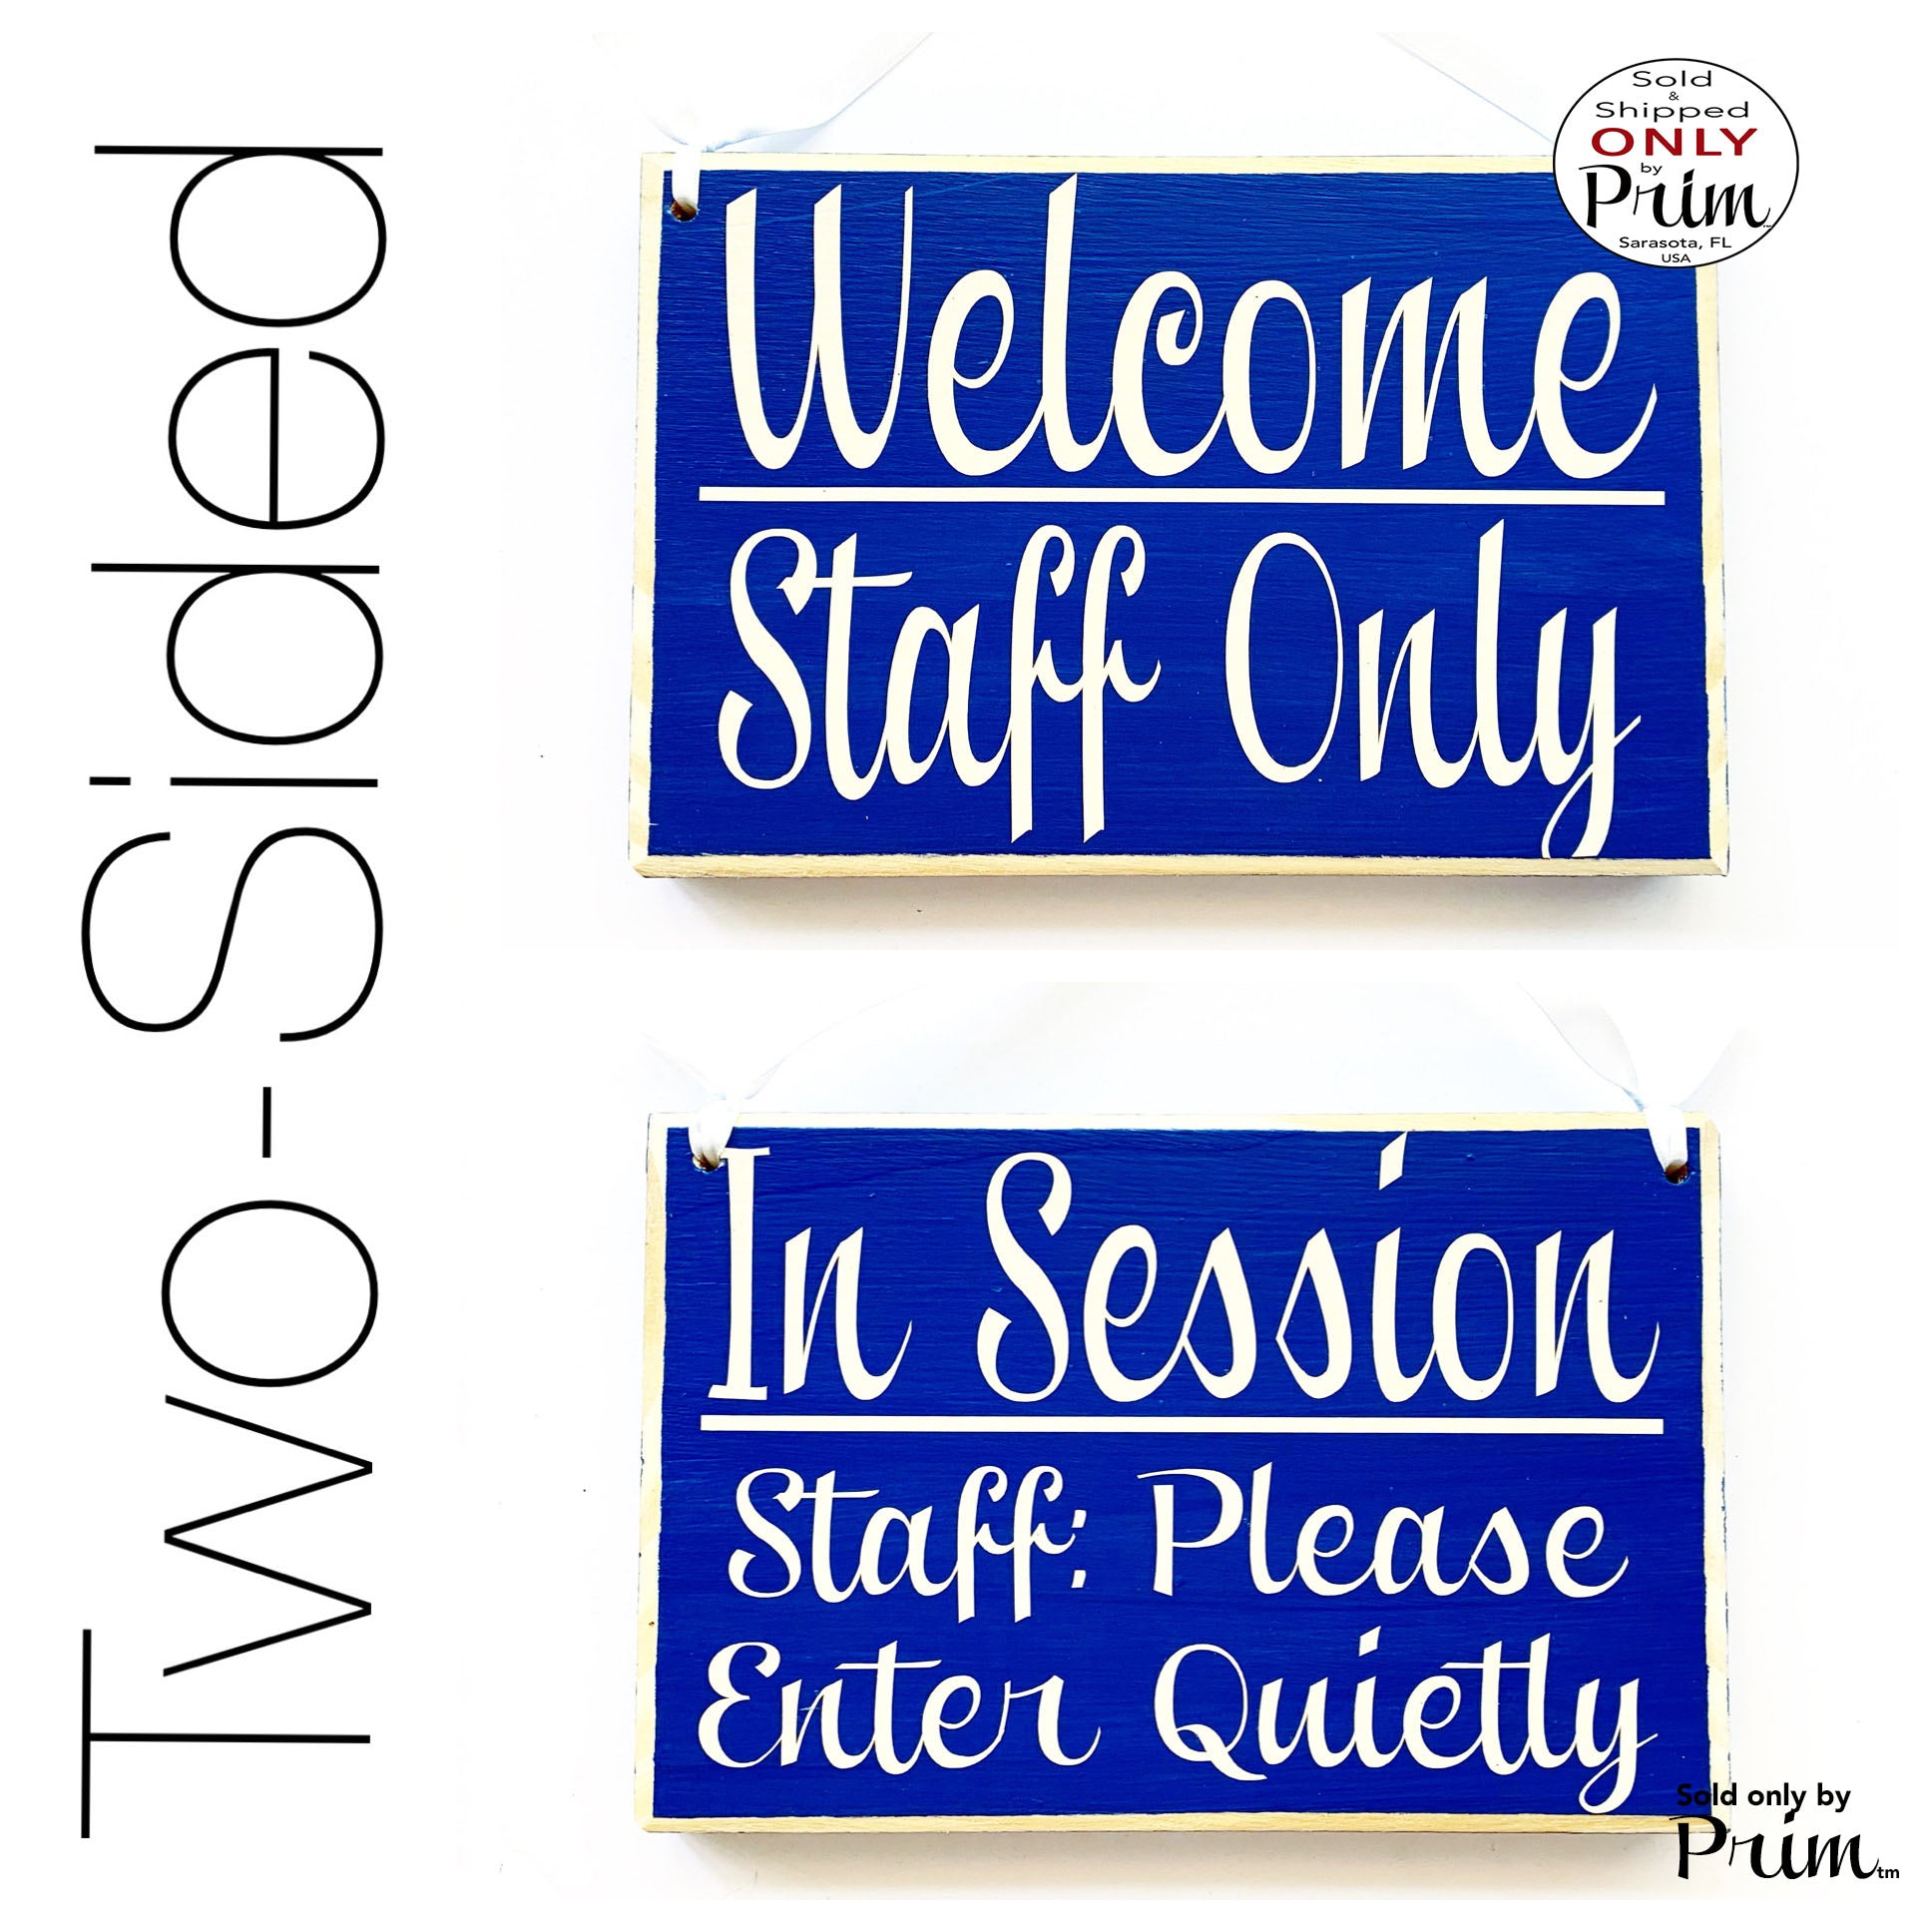 8x6 Two Sided Welcome Staff Only In Session Staff Please Enter Quietly Custom Wood Sign Employees Do Not Enter Private No Entry Door Plaque Designs by Prim